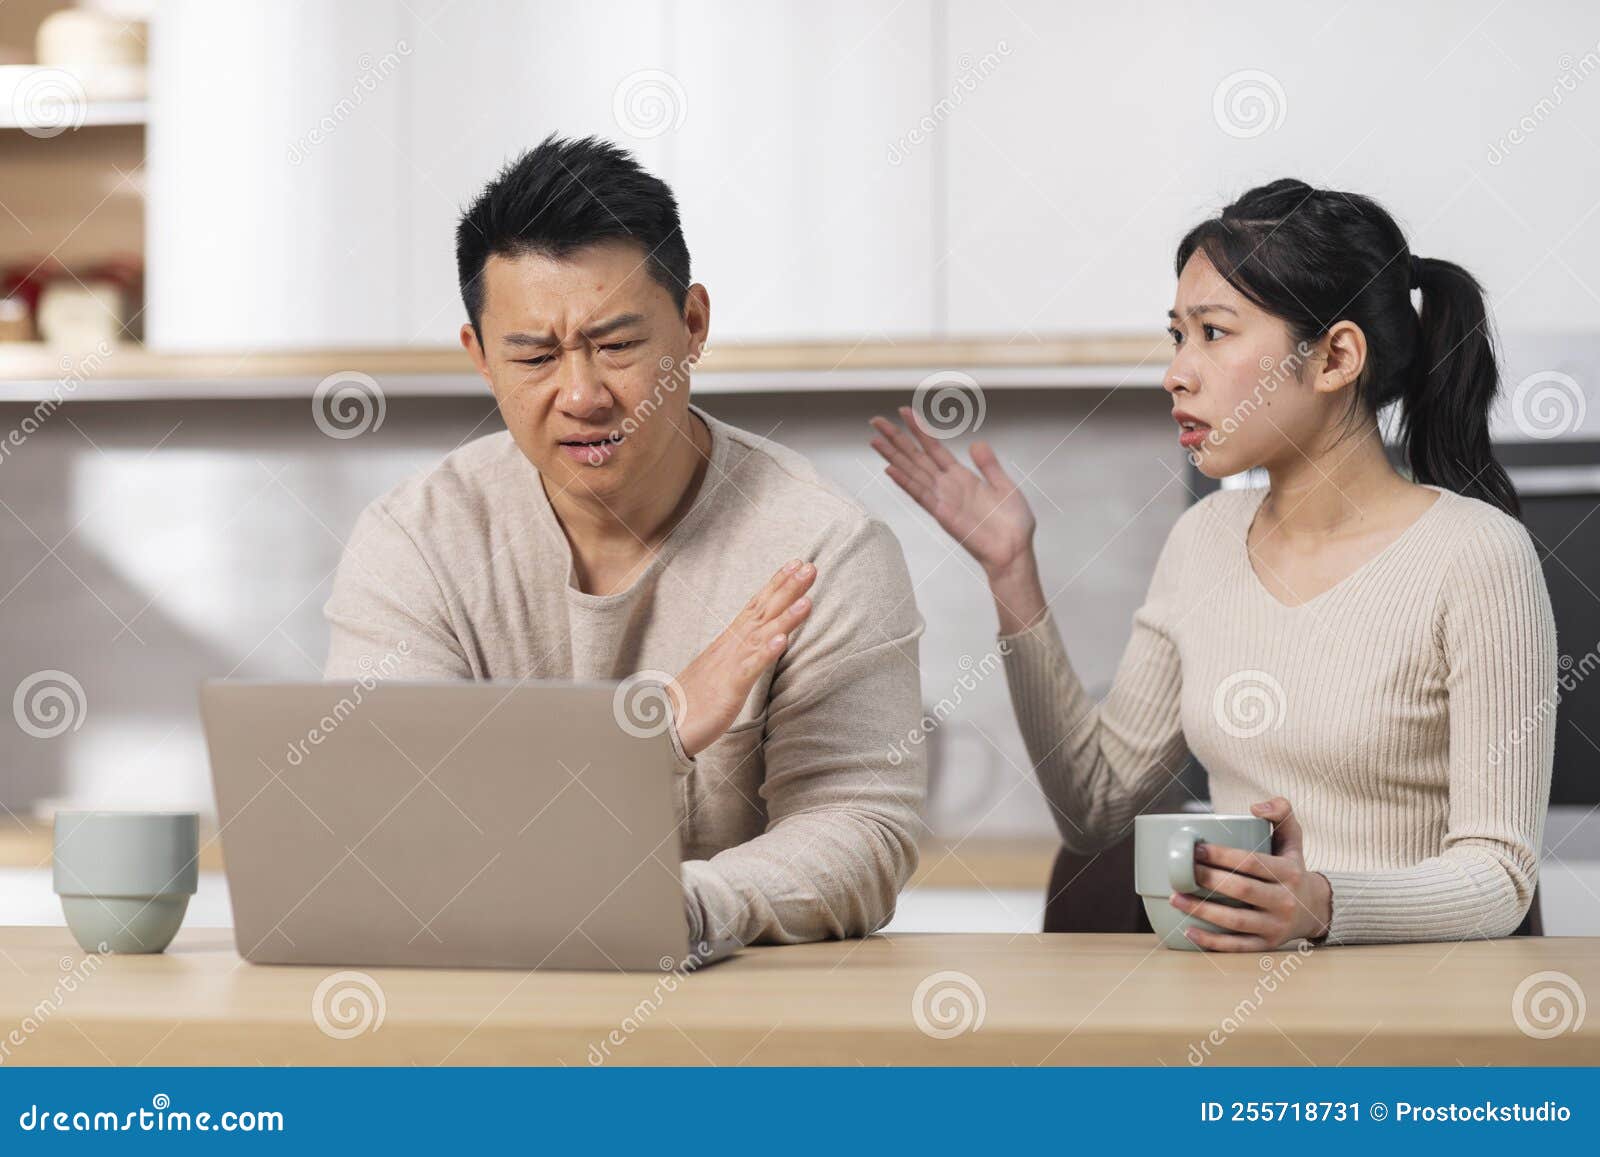 Angry Asian Woman Shouting at Her Husband Using Laptop Stock Image ... pic